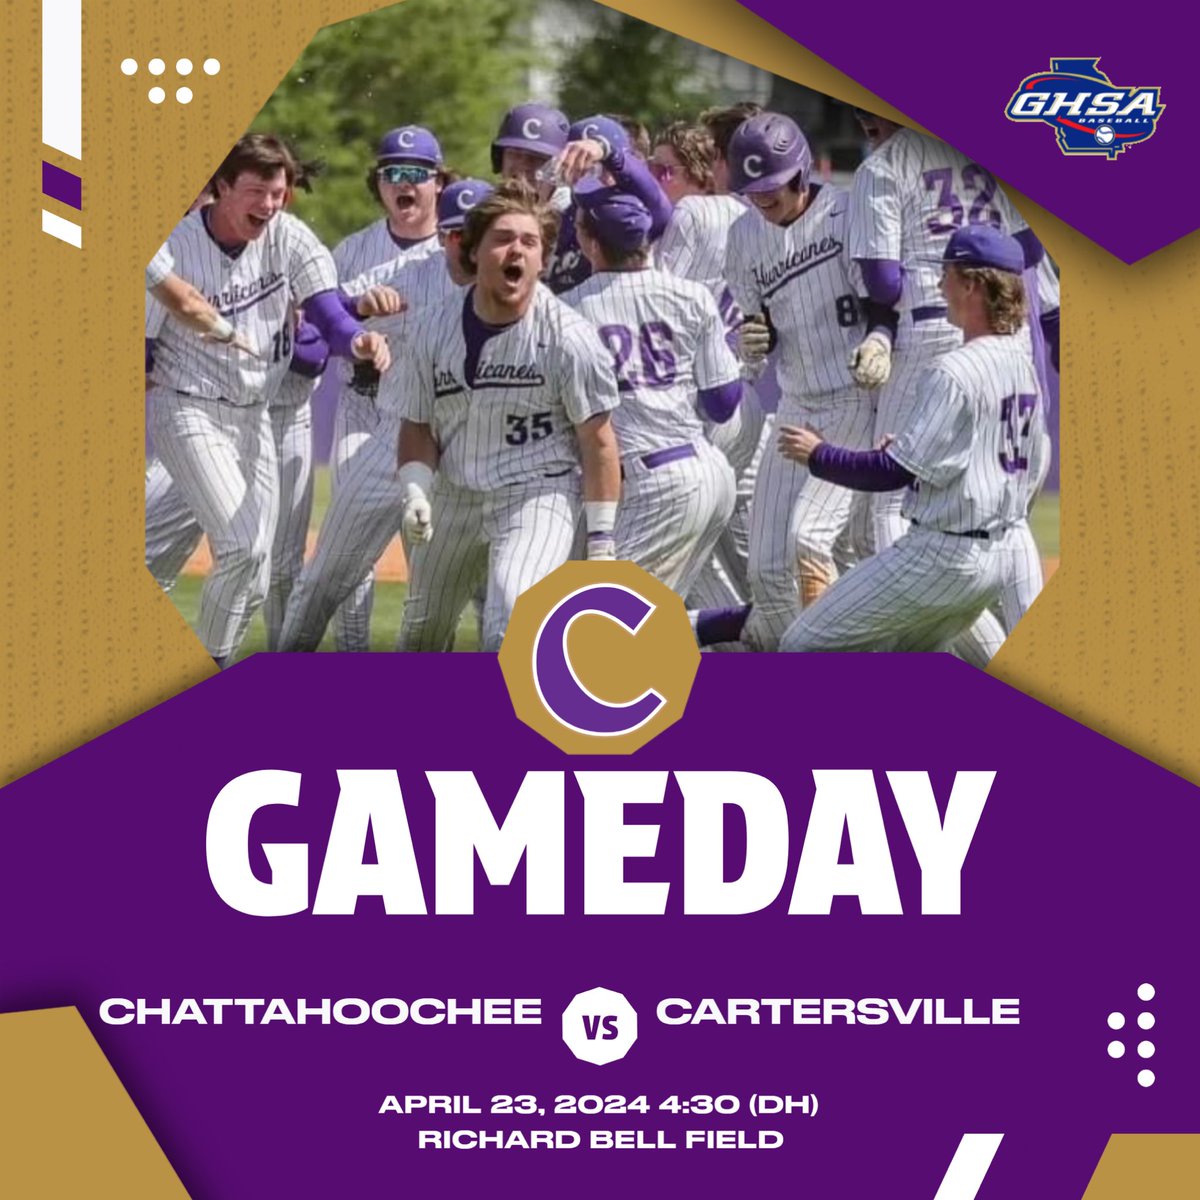 It’s State Tournament Game Day in Cartersville! The Canes host Chattahoochee in the 1st Round of the GHSA State Baseball Championship today at Richard Bell Field. Game 1 of the DH is scheduled to begin at 4:30PM.